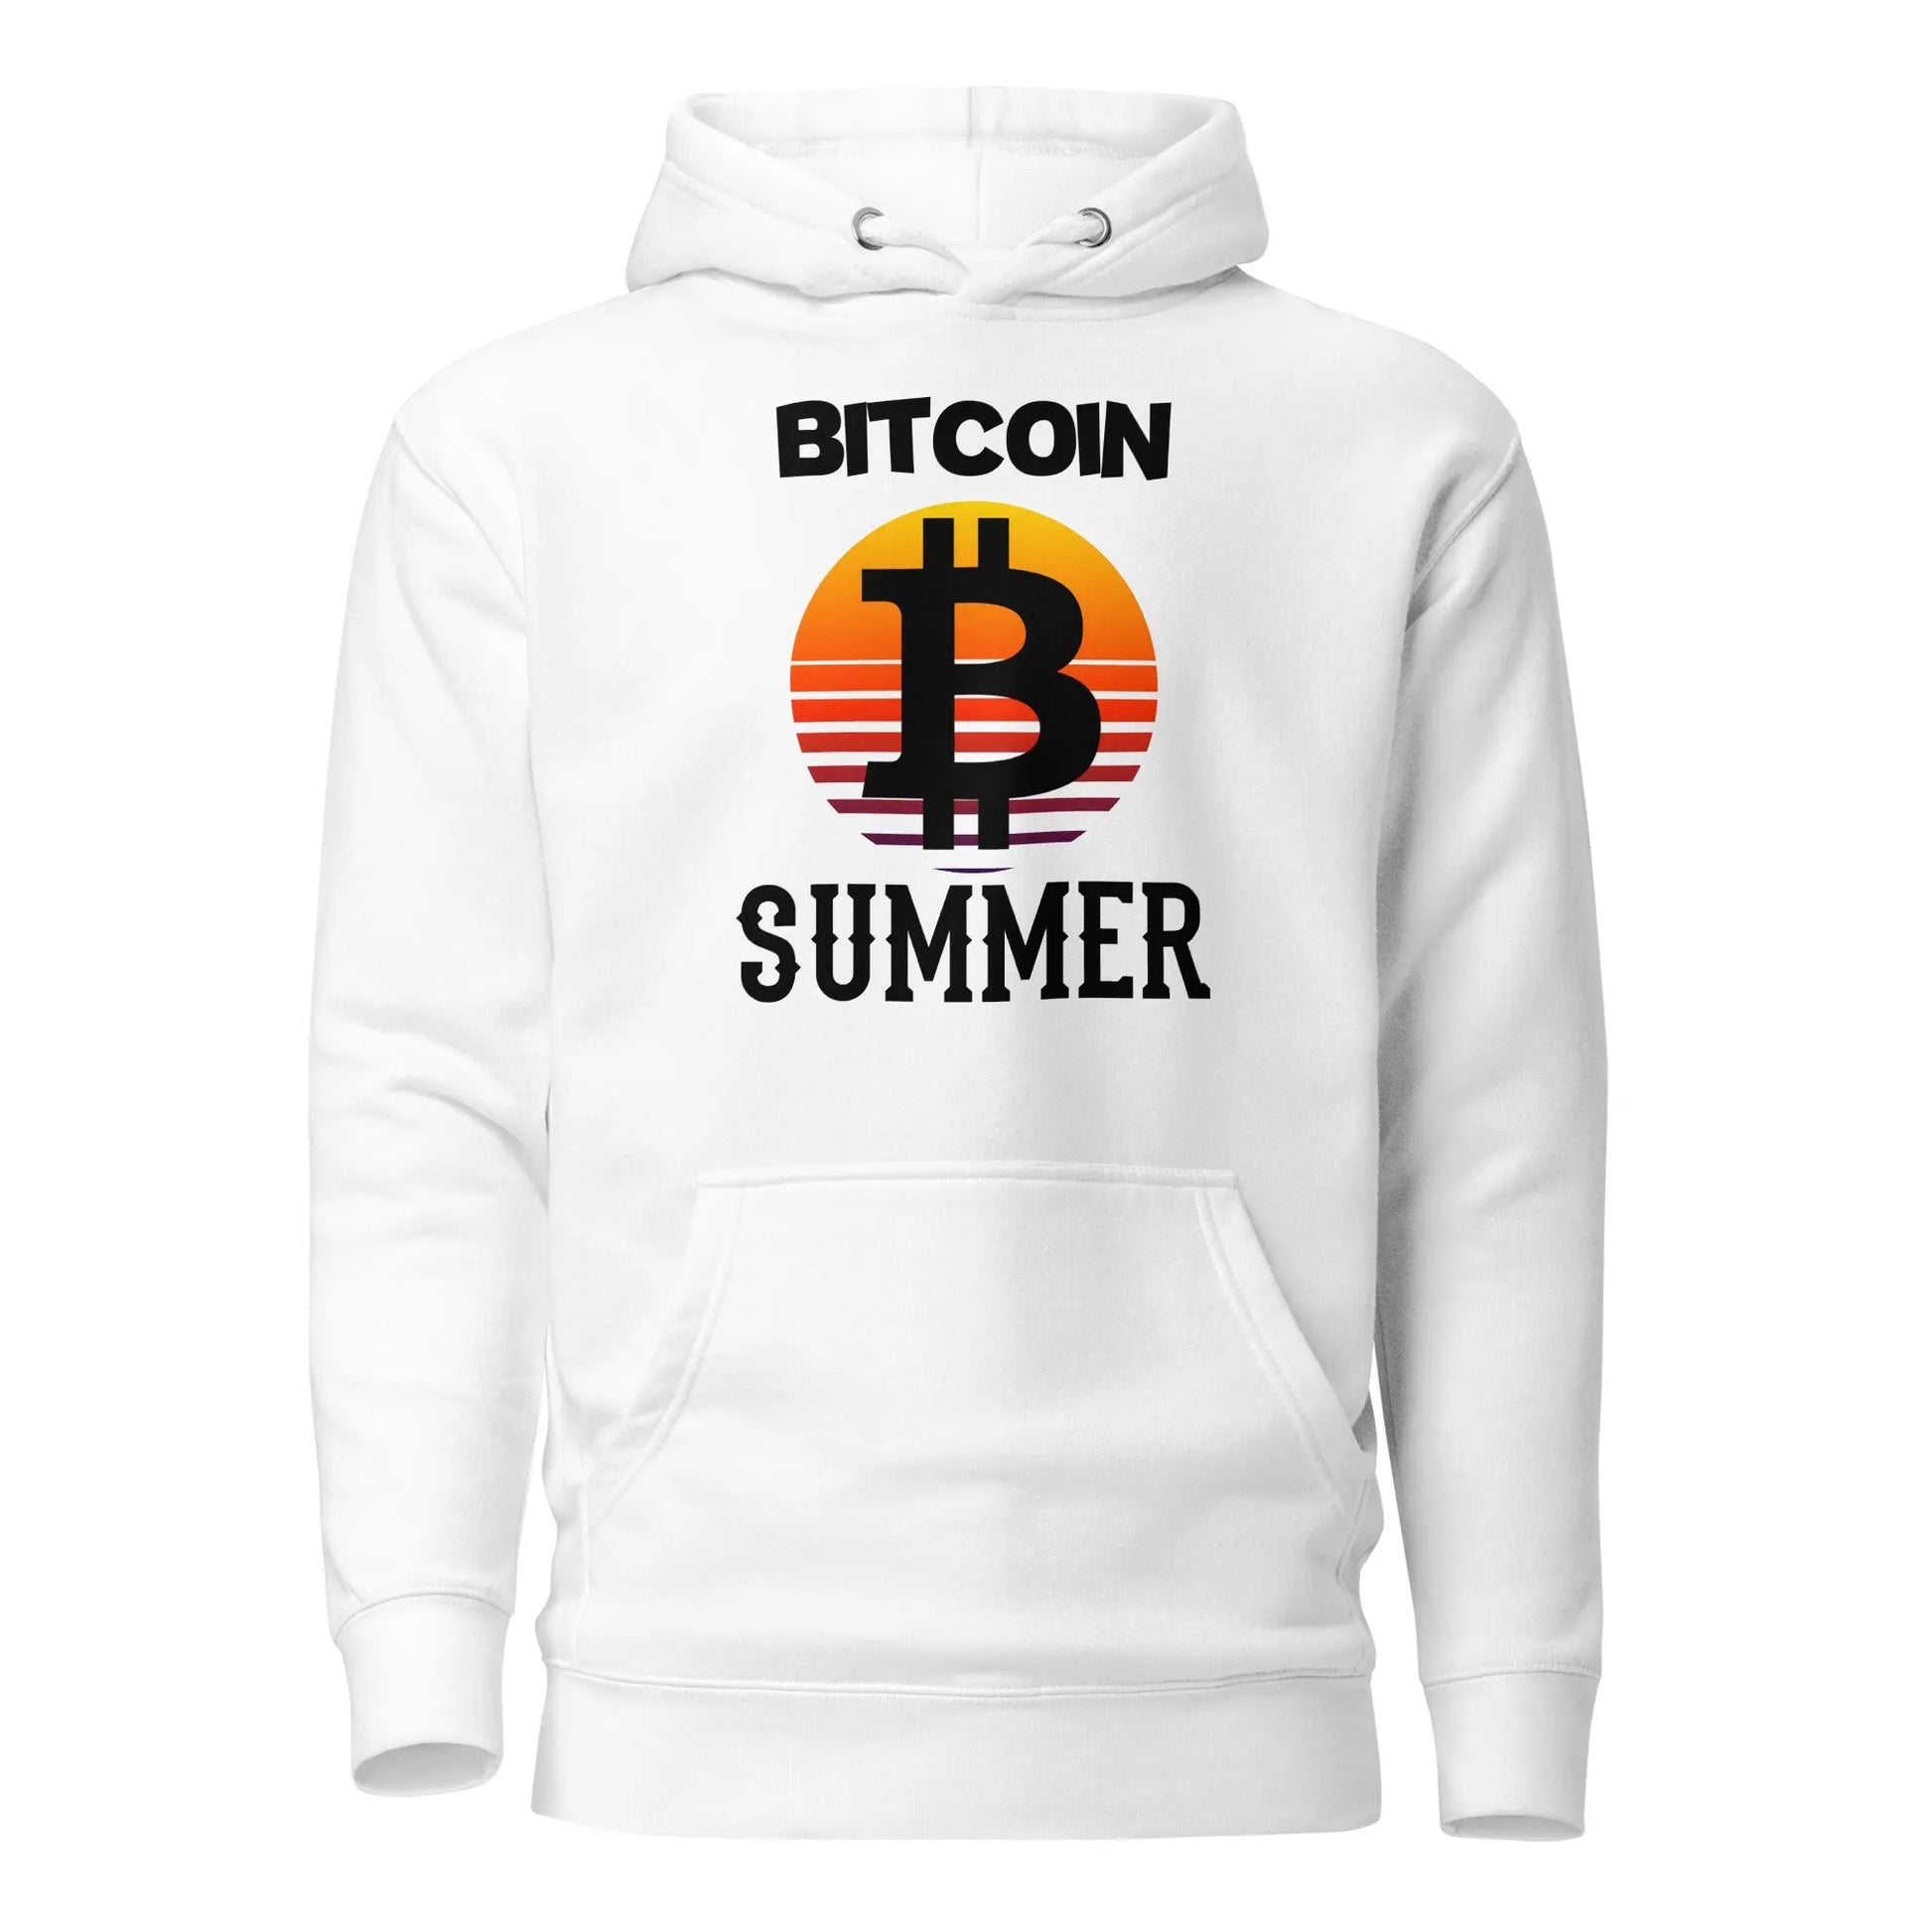 Bitcoin Summer - Premium Unisex Bitcoin Hoodie White Color - Store of Value